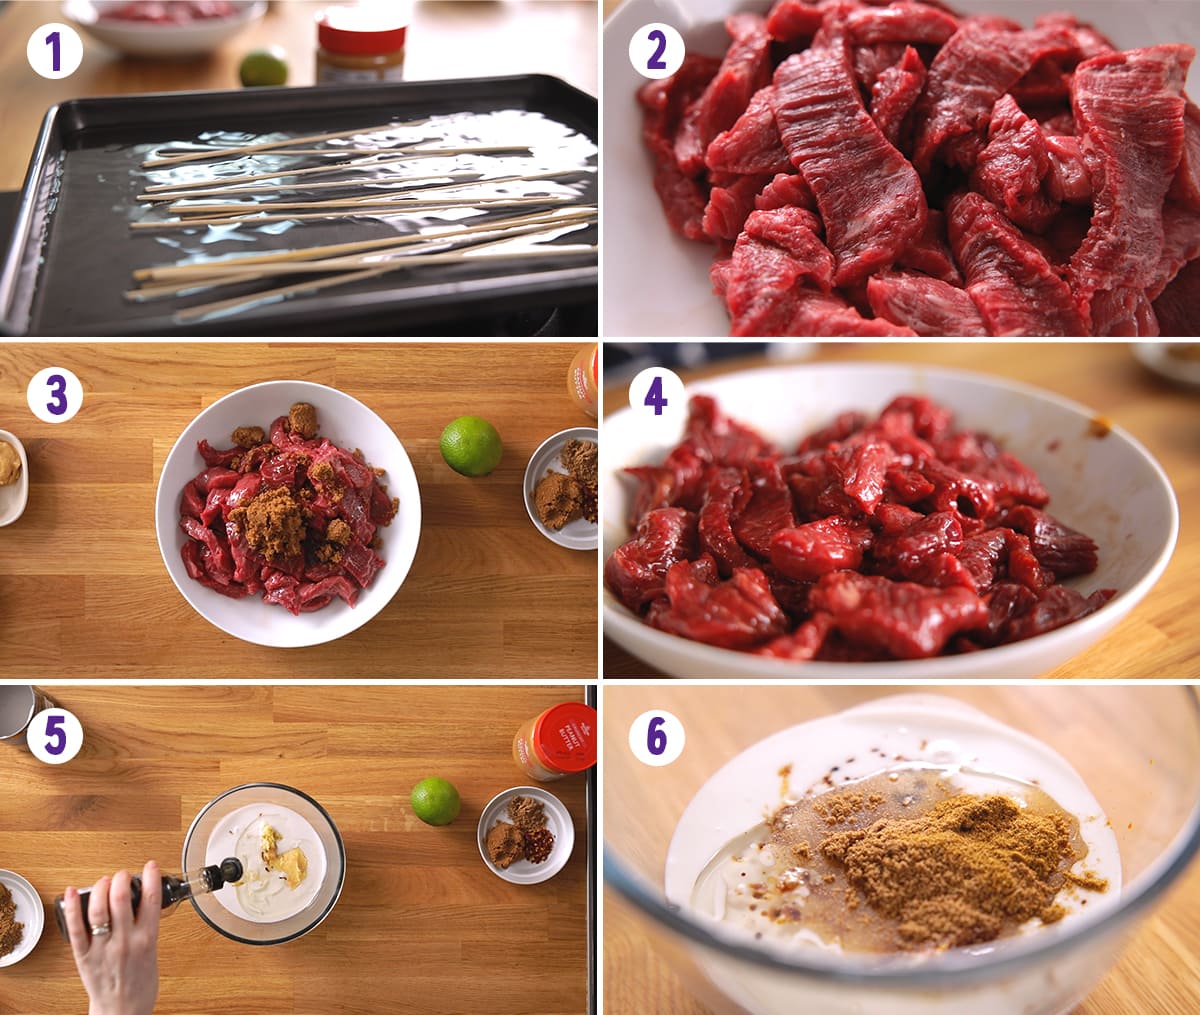 6 image collage showing initial steps in making beef satay